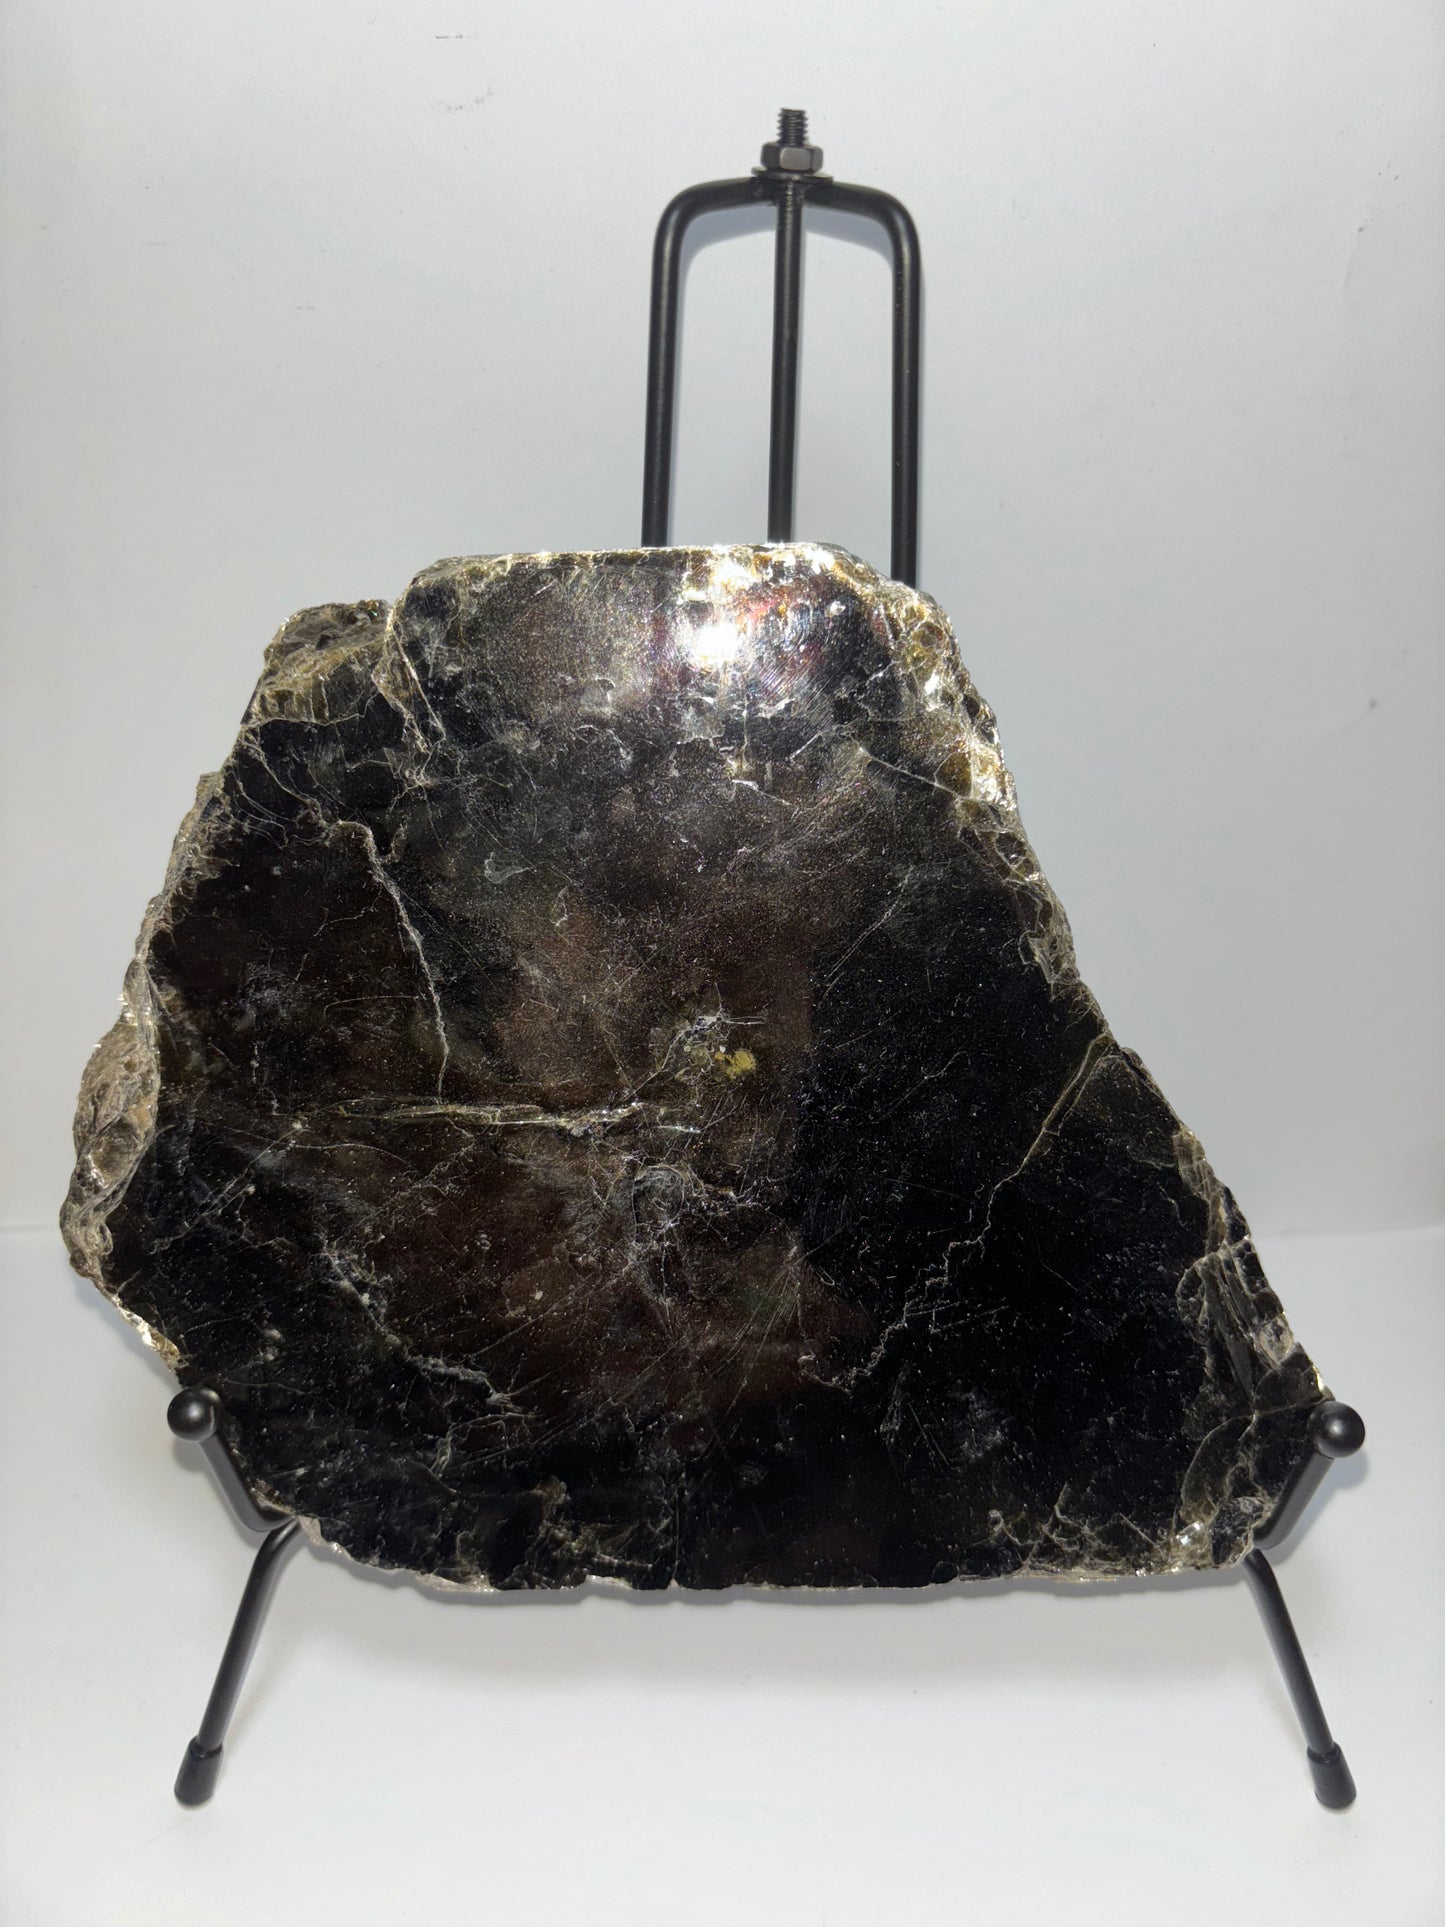 Mica slab on stand